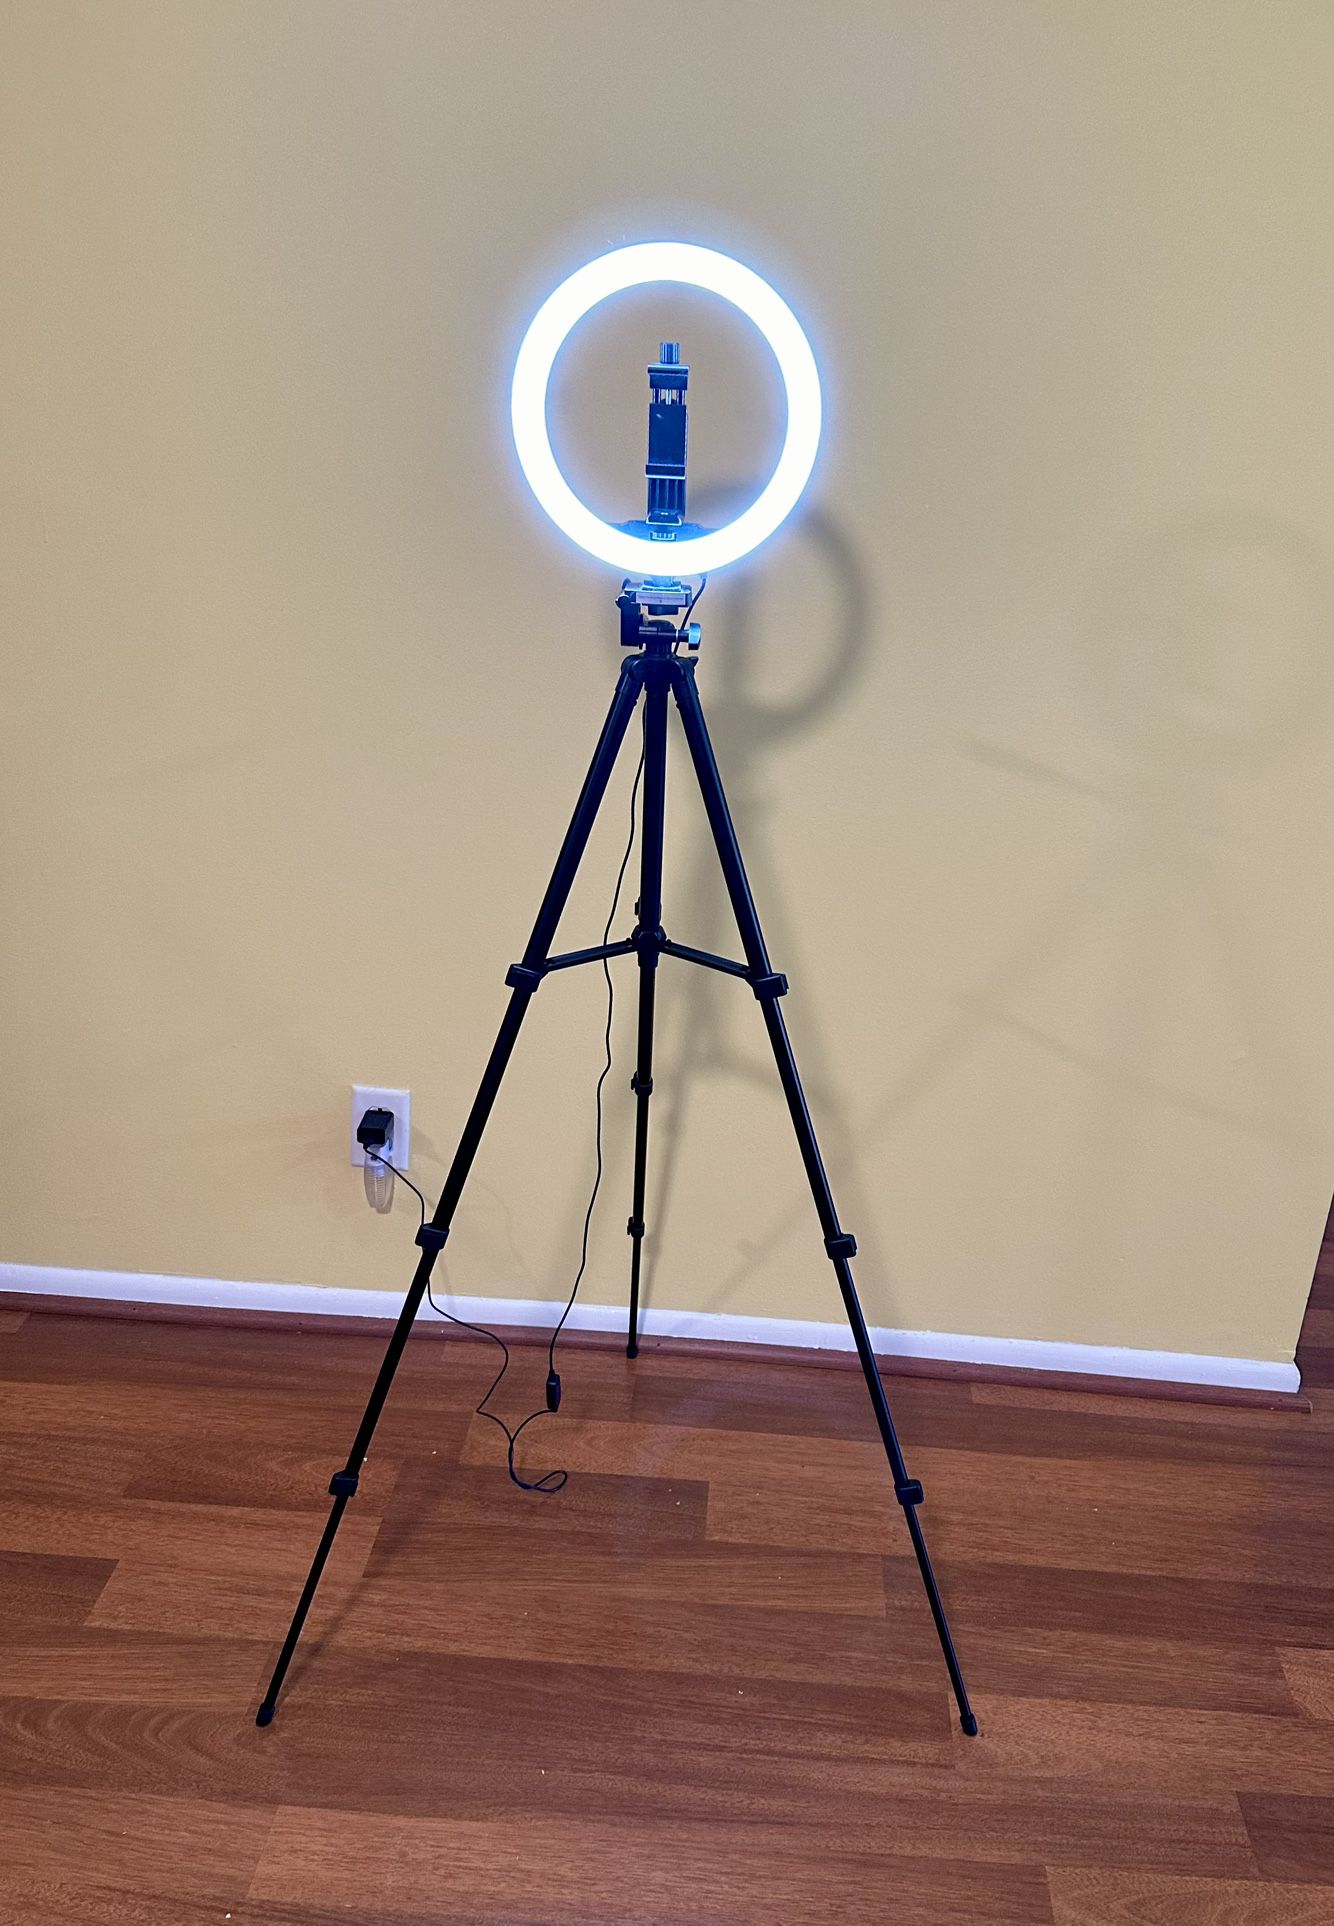 10” Selfie Ring Light With Tripod 